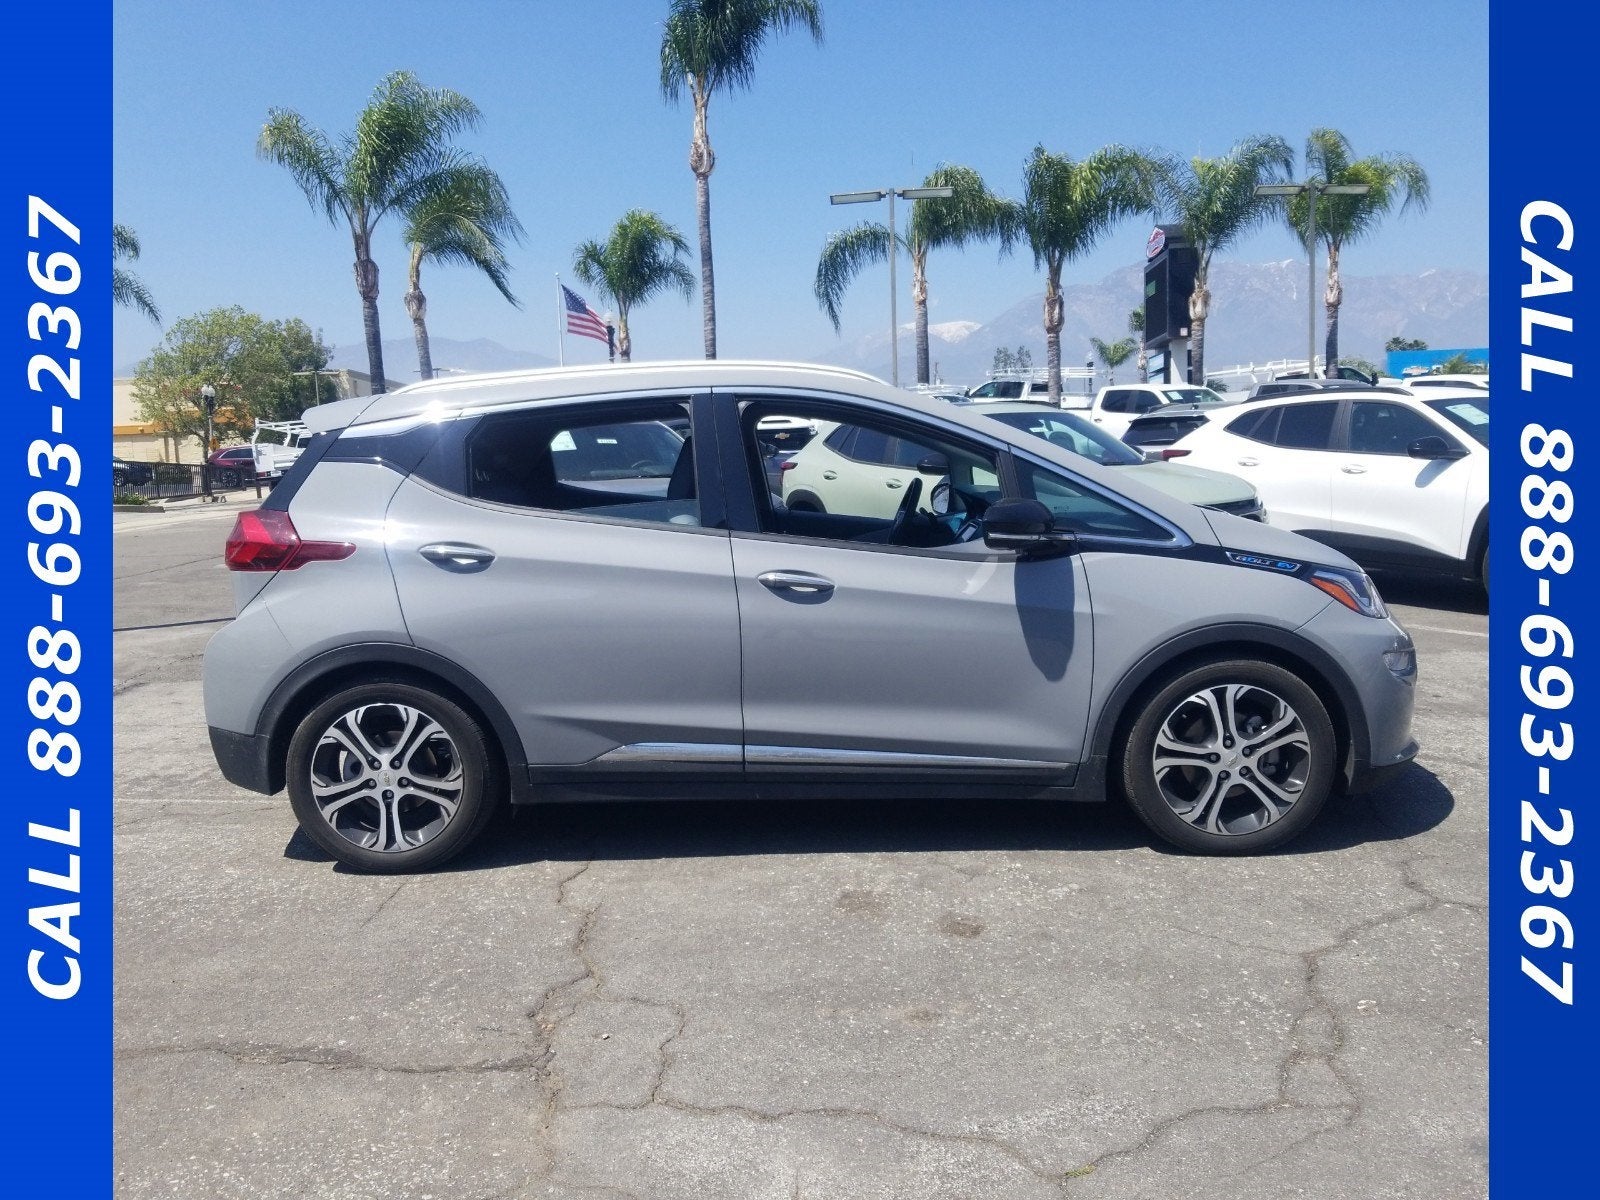 Used 2021 Chevrolet Bolt EV Premier with VIN 1G1FZ6S07M4109286 for sale in Upland, CA